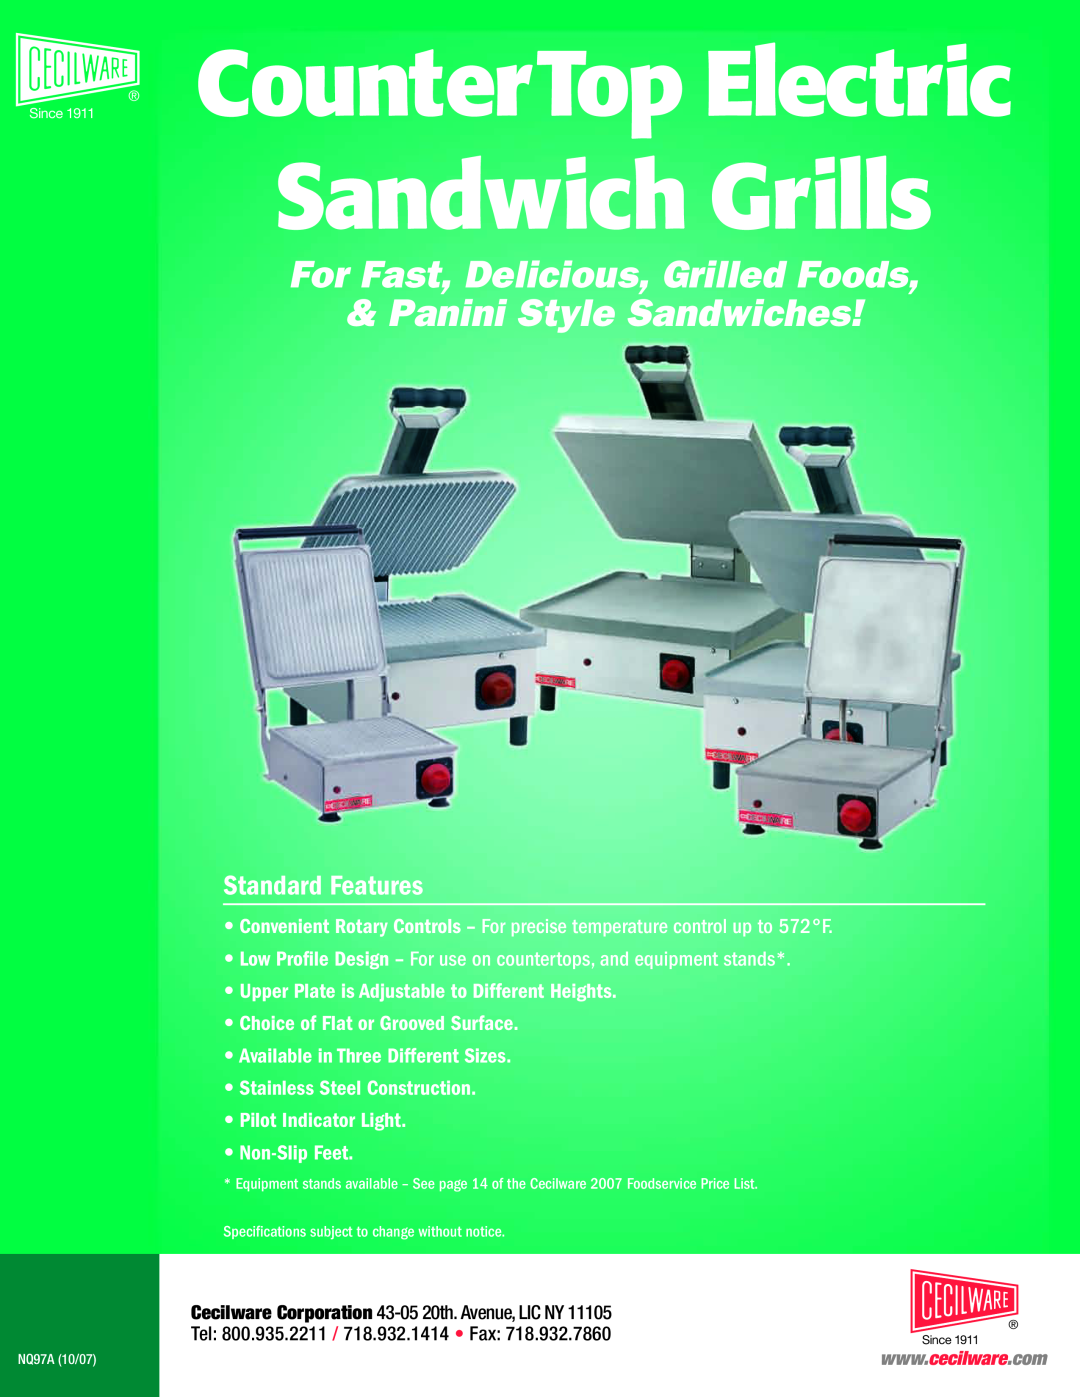 Cecilware MRSGA-120 specifications Since 1911 CounterTop Electric Sandwich Grills, For Fast, Delicious, Grilled Foods 